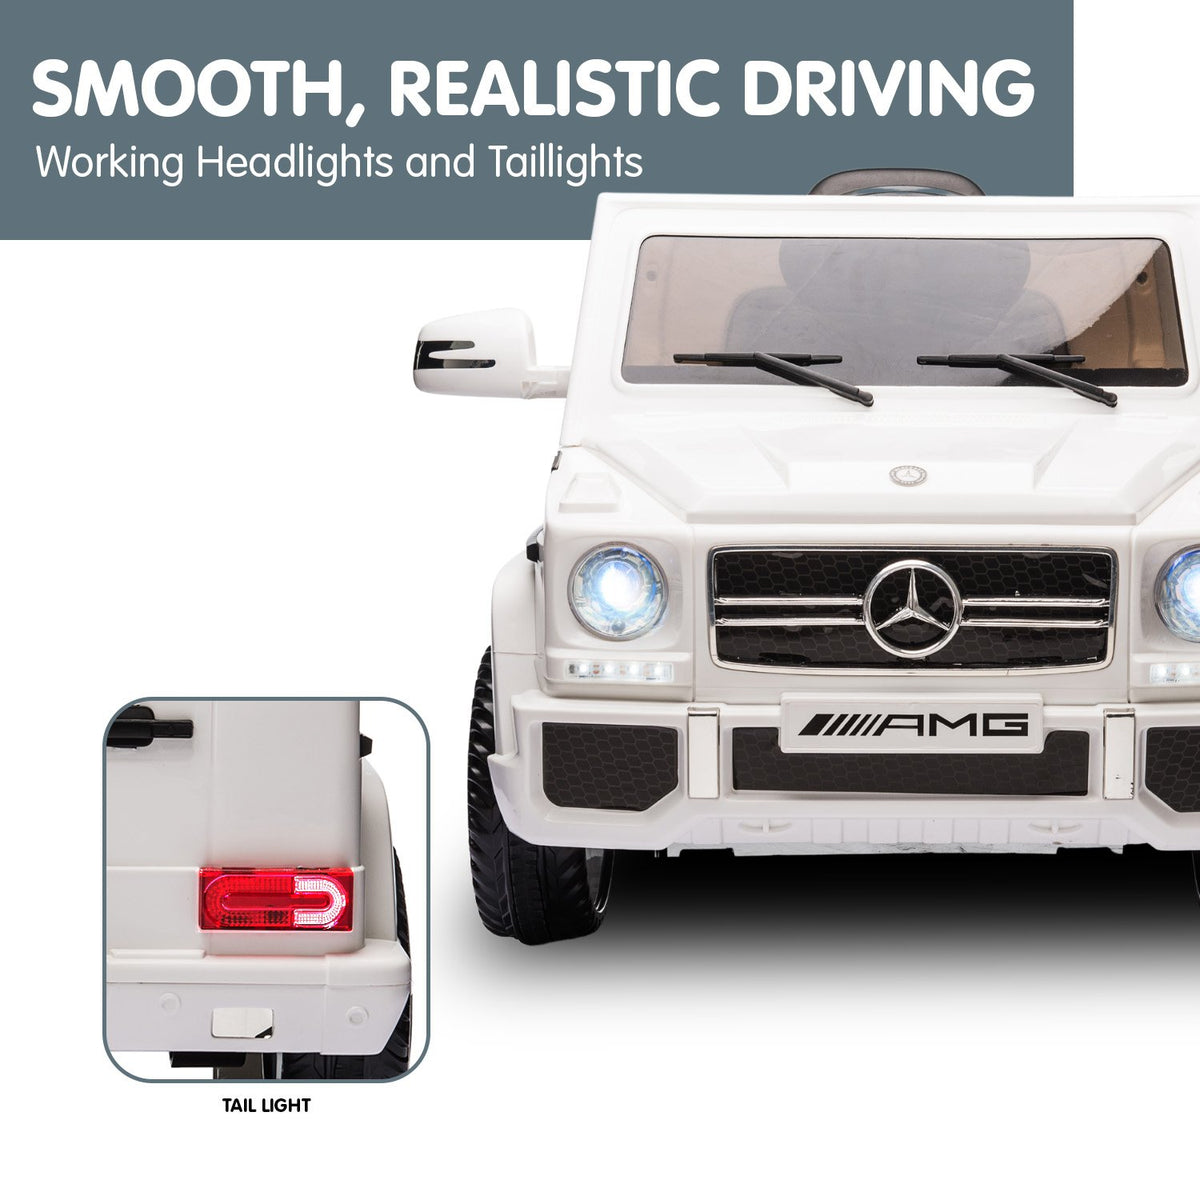 Mercedes Benz AMG G65 Licensed Kids Ride On Electric Car - White